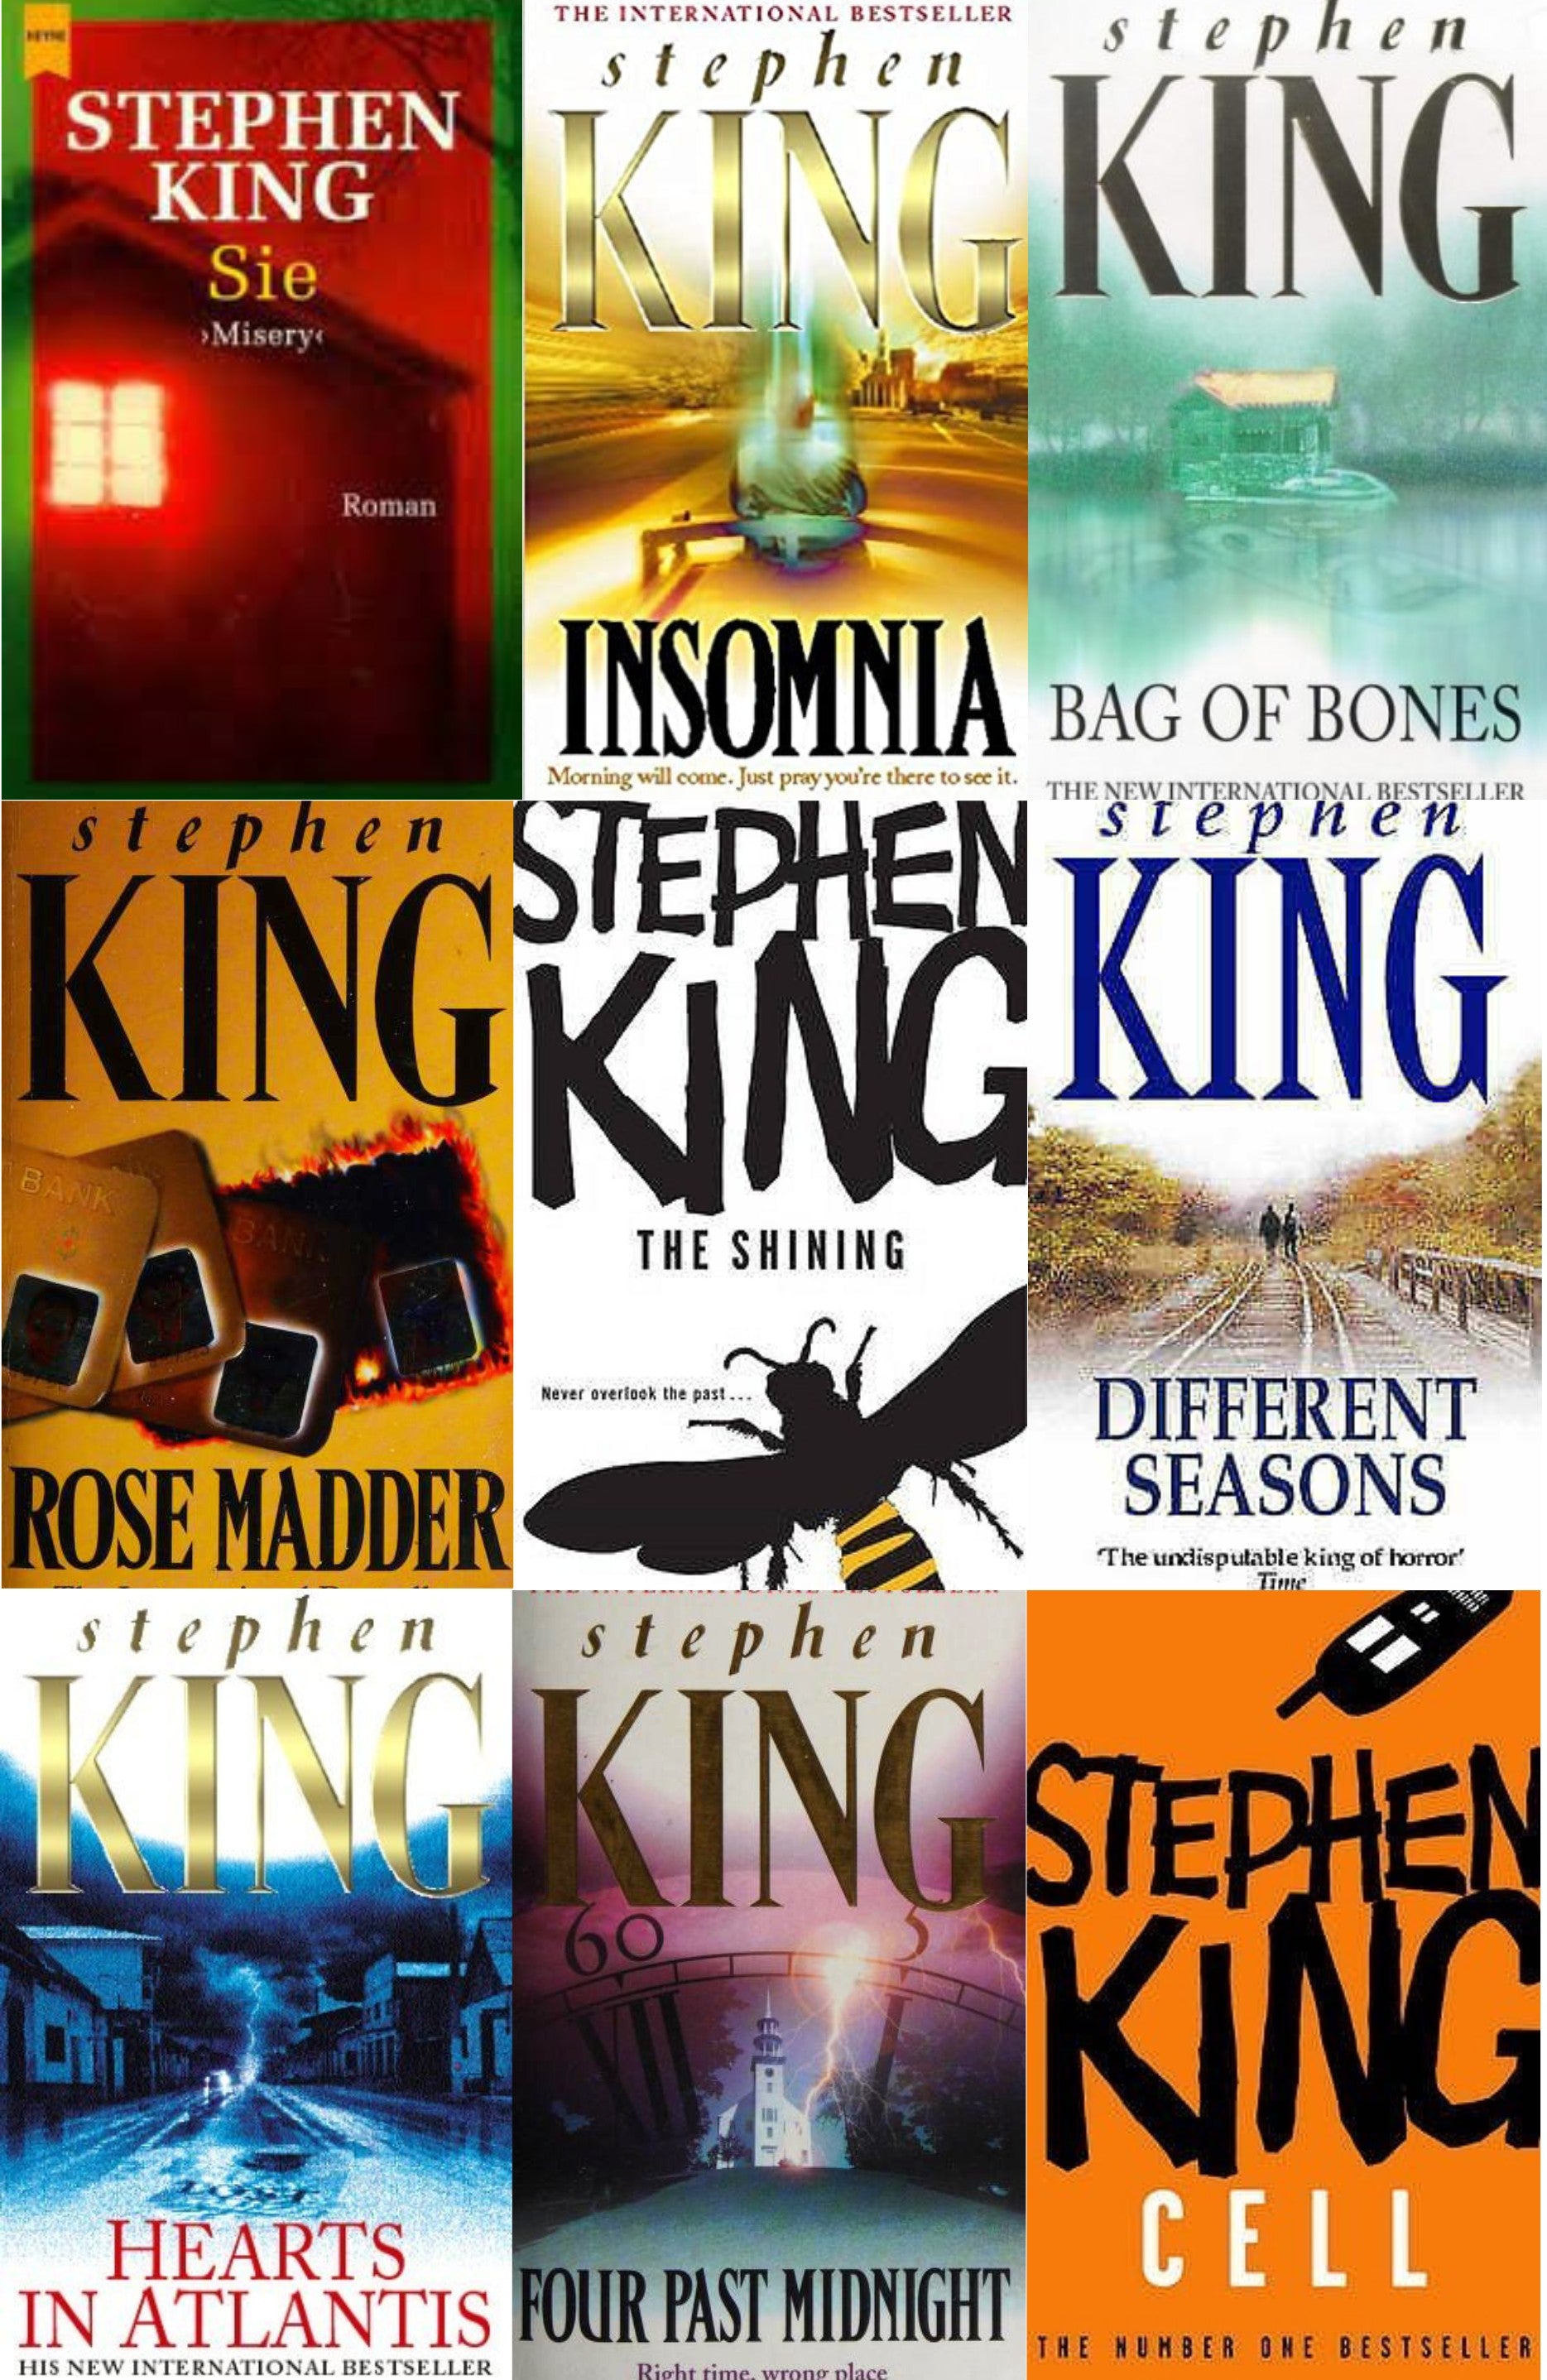 Stephen King Bestseller Book Combo ( Four Past Midnight, Insomnia, Cell, Hearts In Atlantis, Different Seasons, Rose Madder, Sie, The Waste Lands: The Dark Tower, Bag of Bones, The Shining )